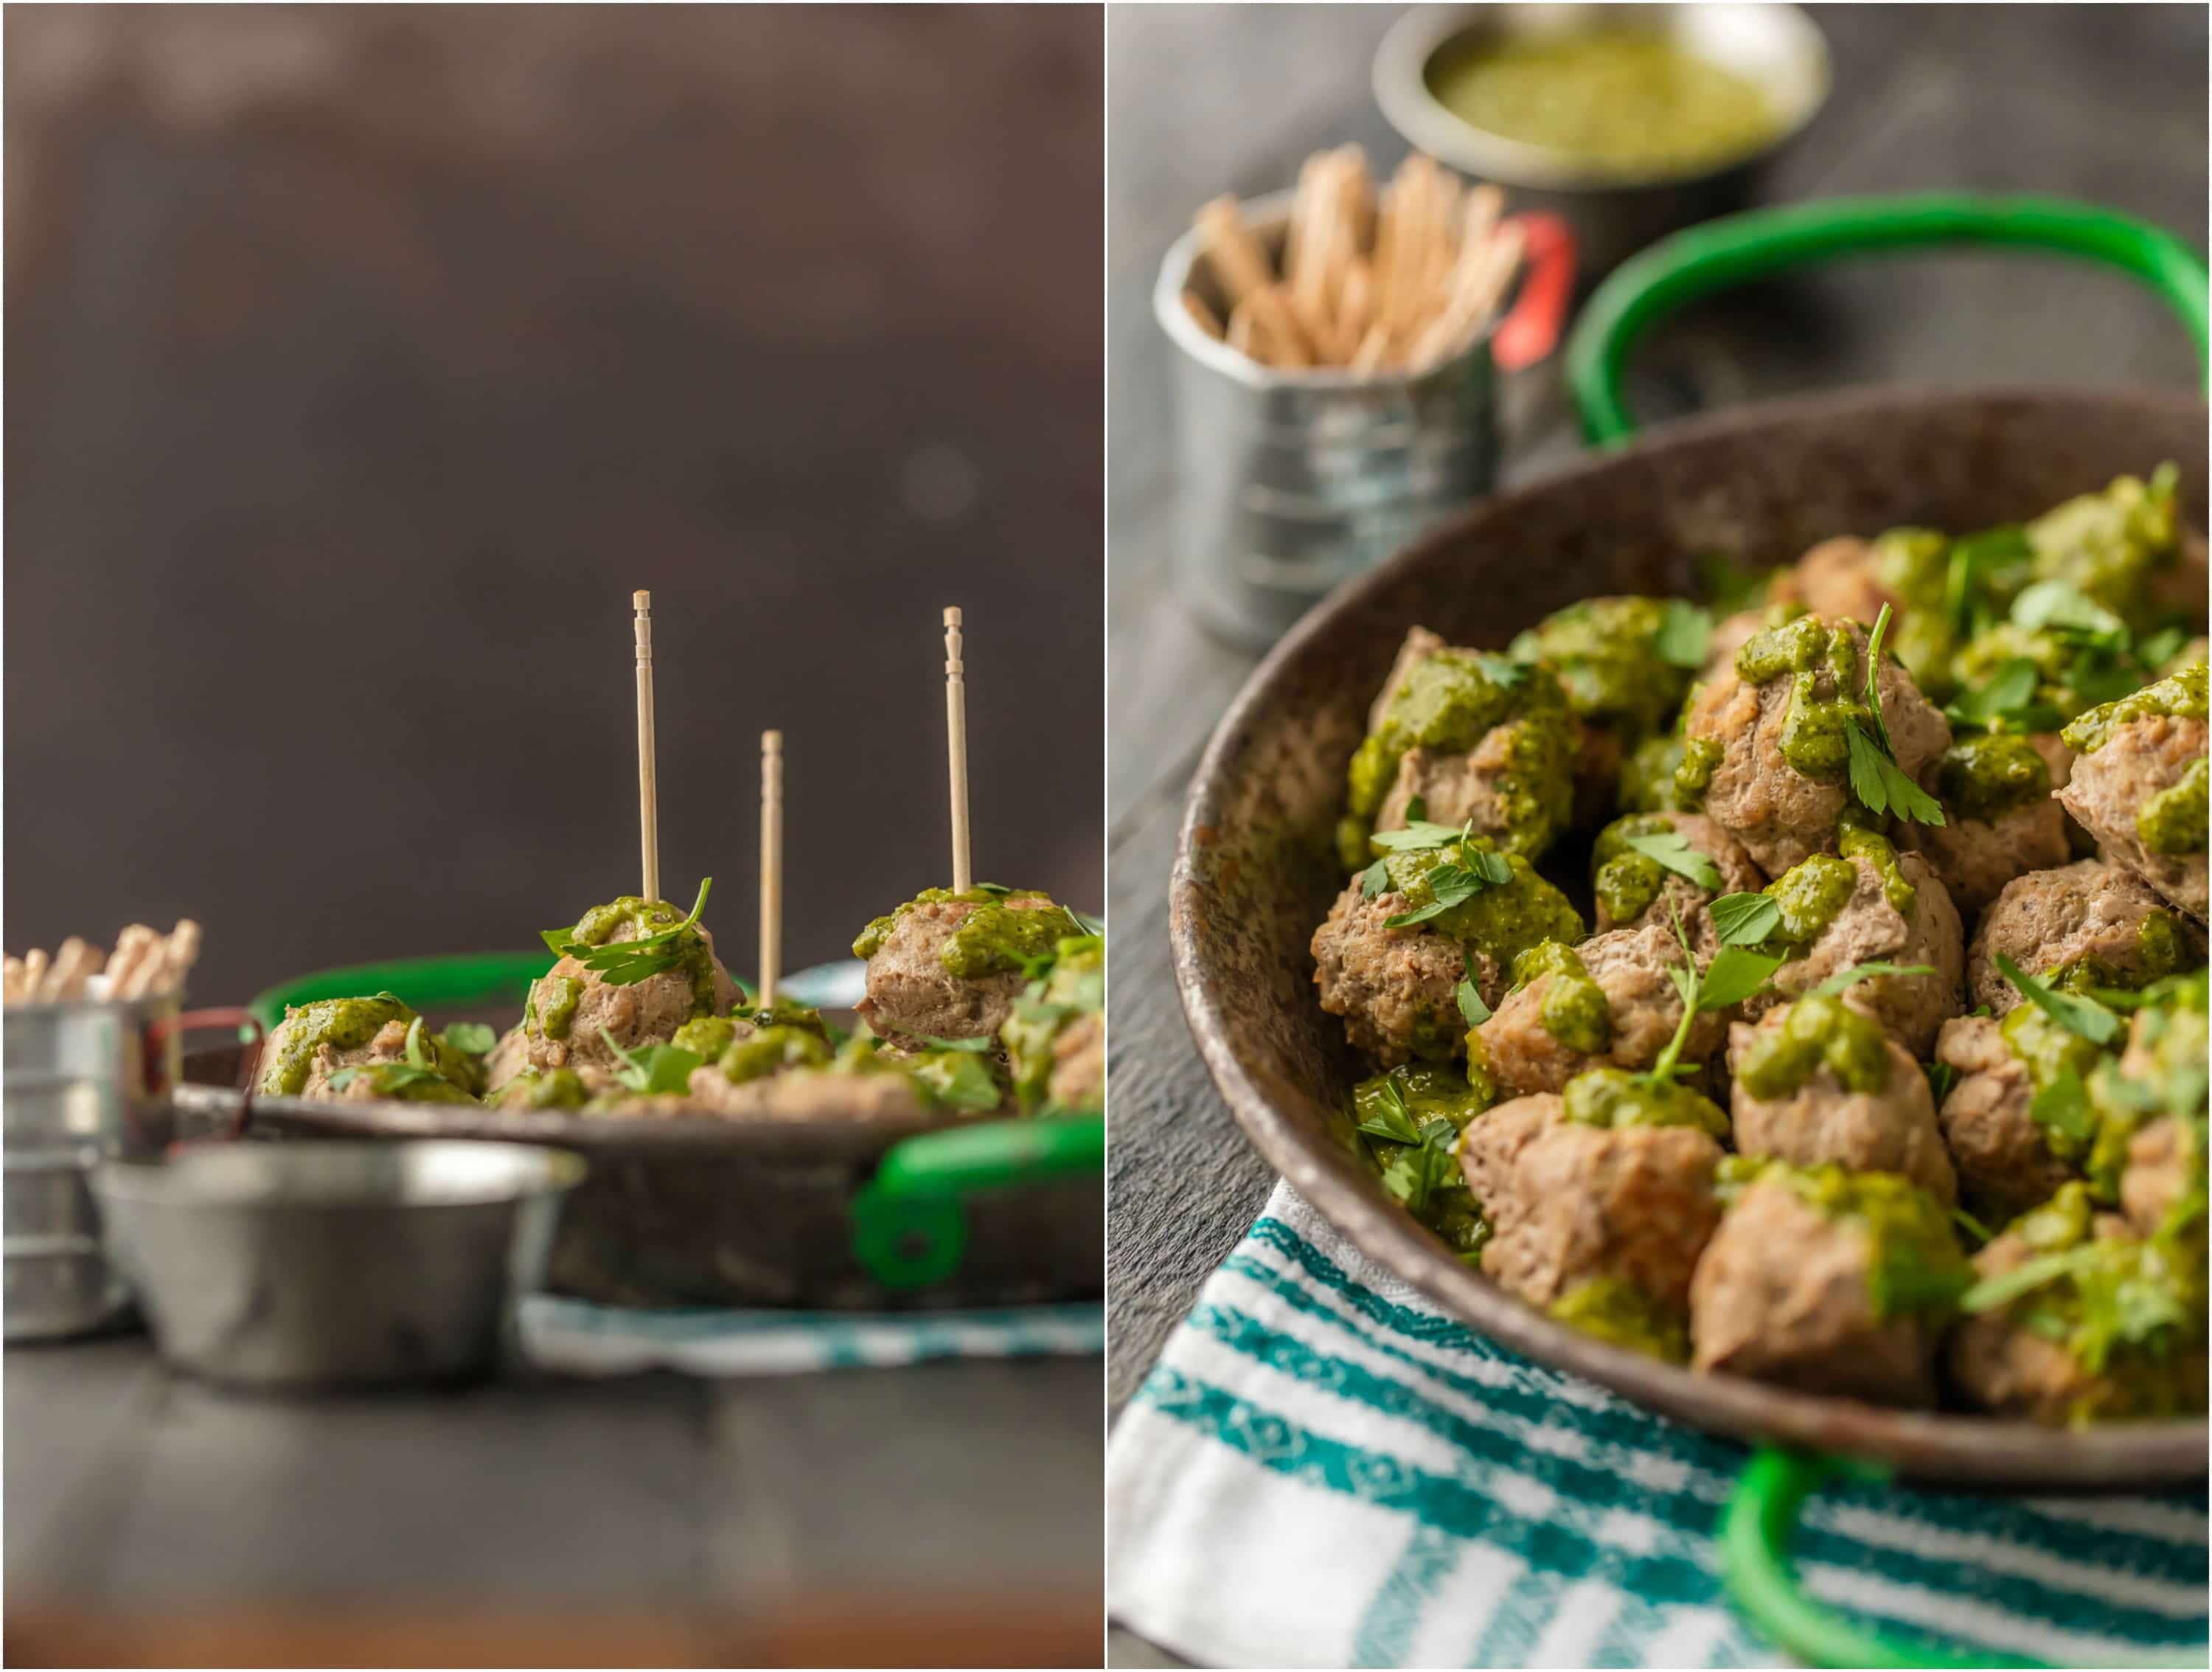 These PERUVIAN DROP MEATBALLS WITH GREEN SAUCE are the perfect holiday or Super Bowl appetizer! The green sauce, made with a parsley base, is just the right amount of spice. The meatballs are just the right amount of easy. Enjoy!